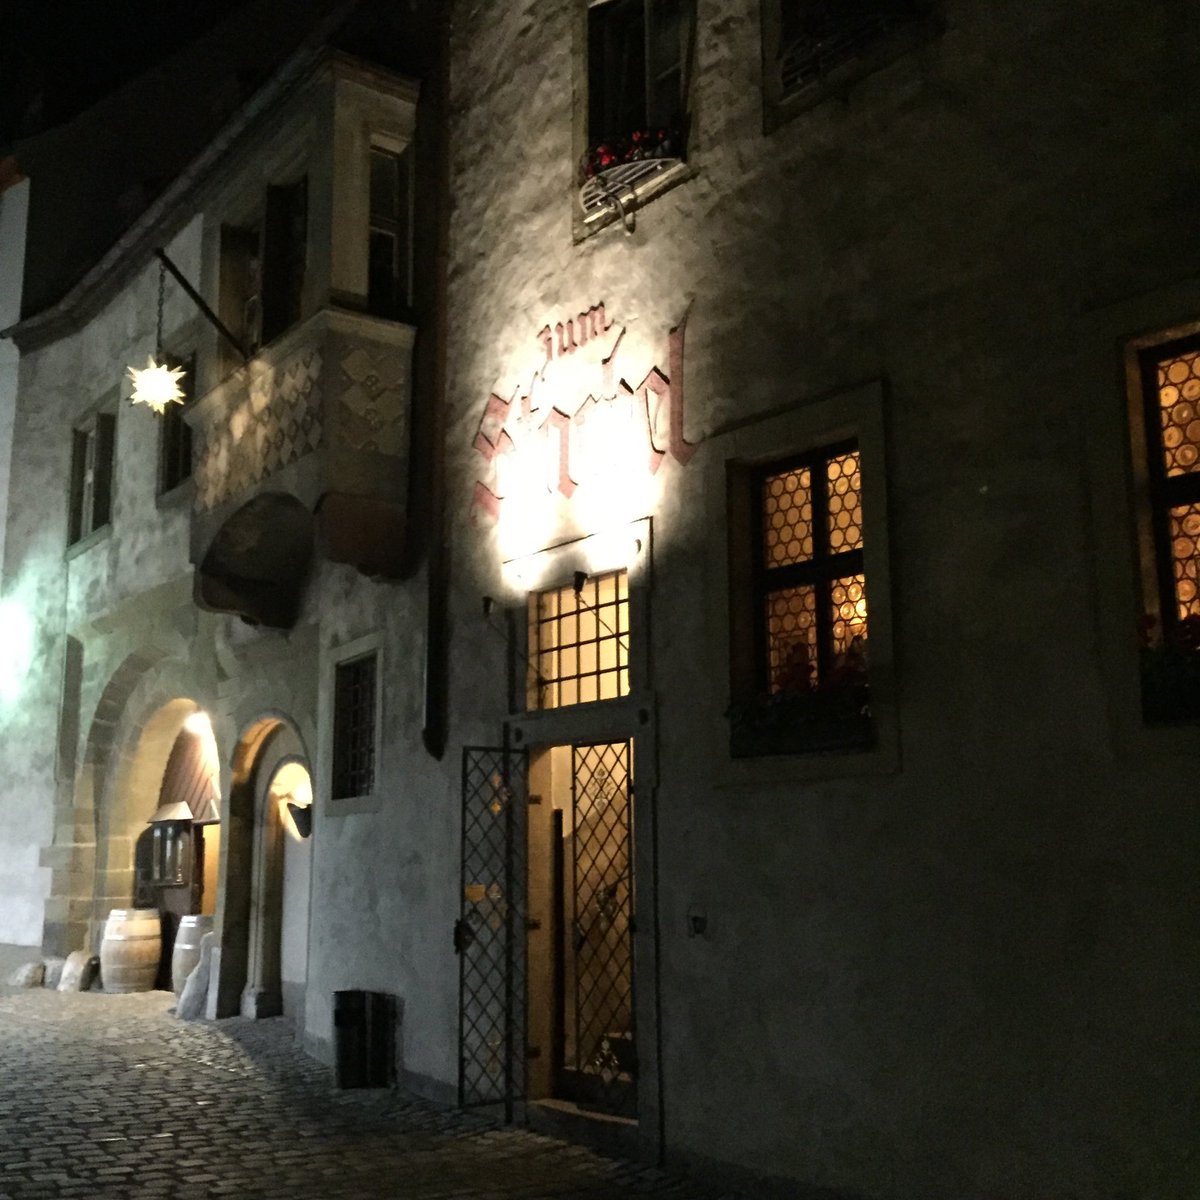 Around the corner from the Untere Marktplatz, you’d find the historic guesthouse Zum Stachel. The little courtyard is gorgeous. Take a peek inside.